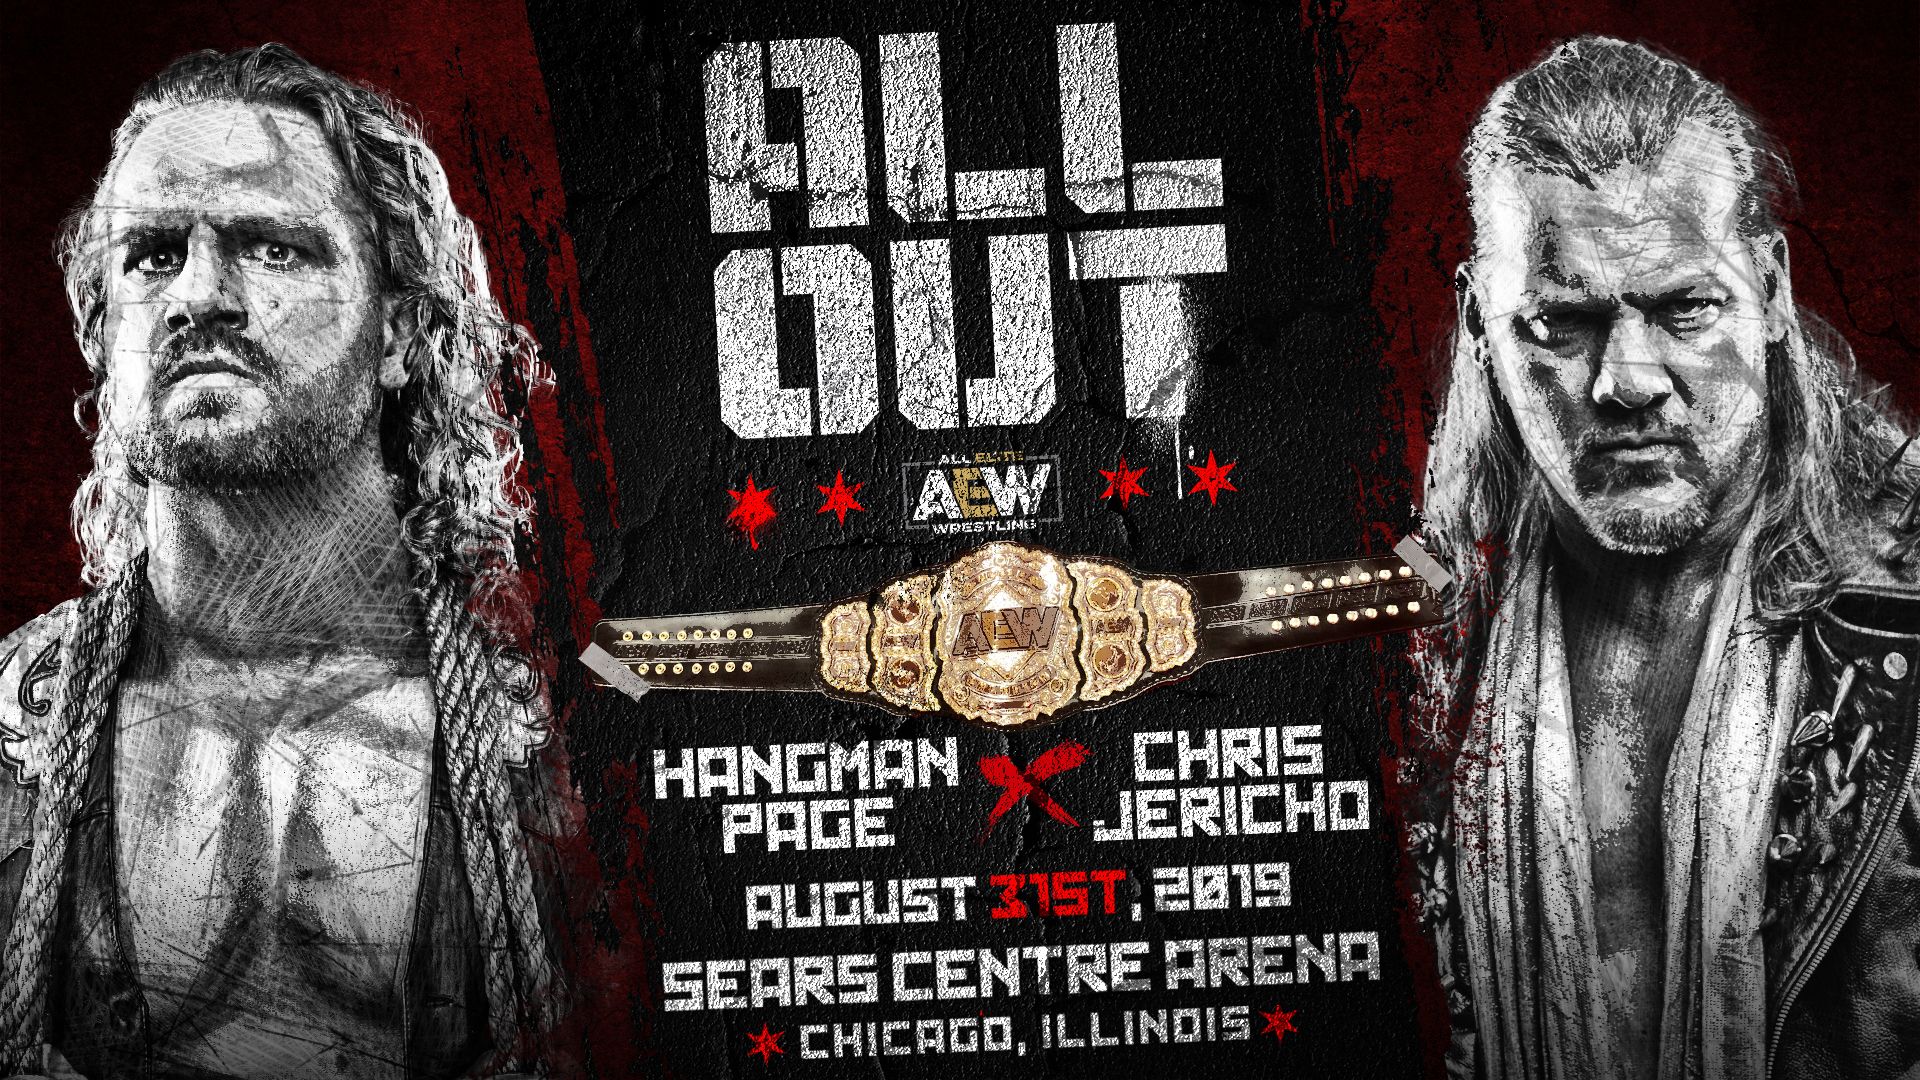 AEW World Championship match set for 'All Out' in August